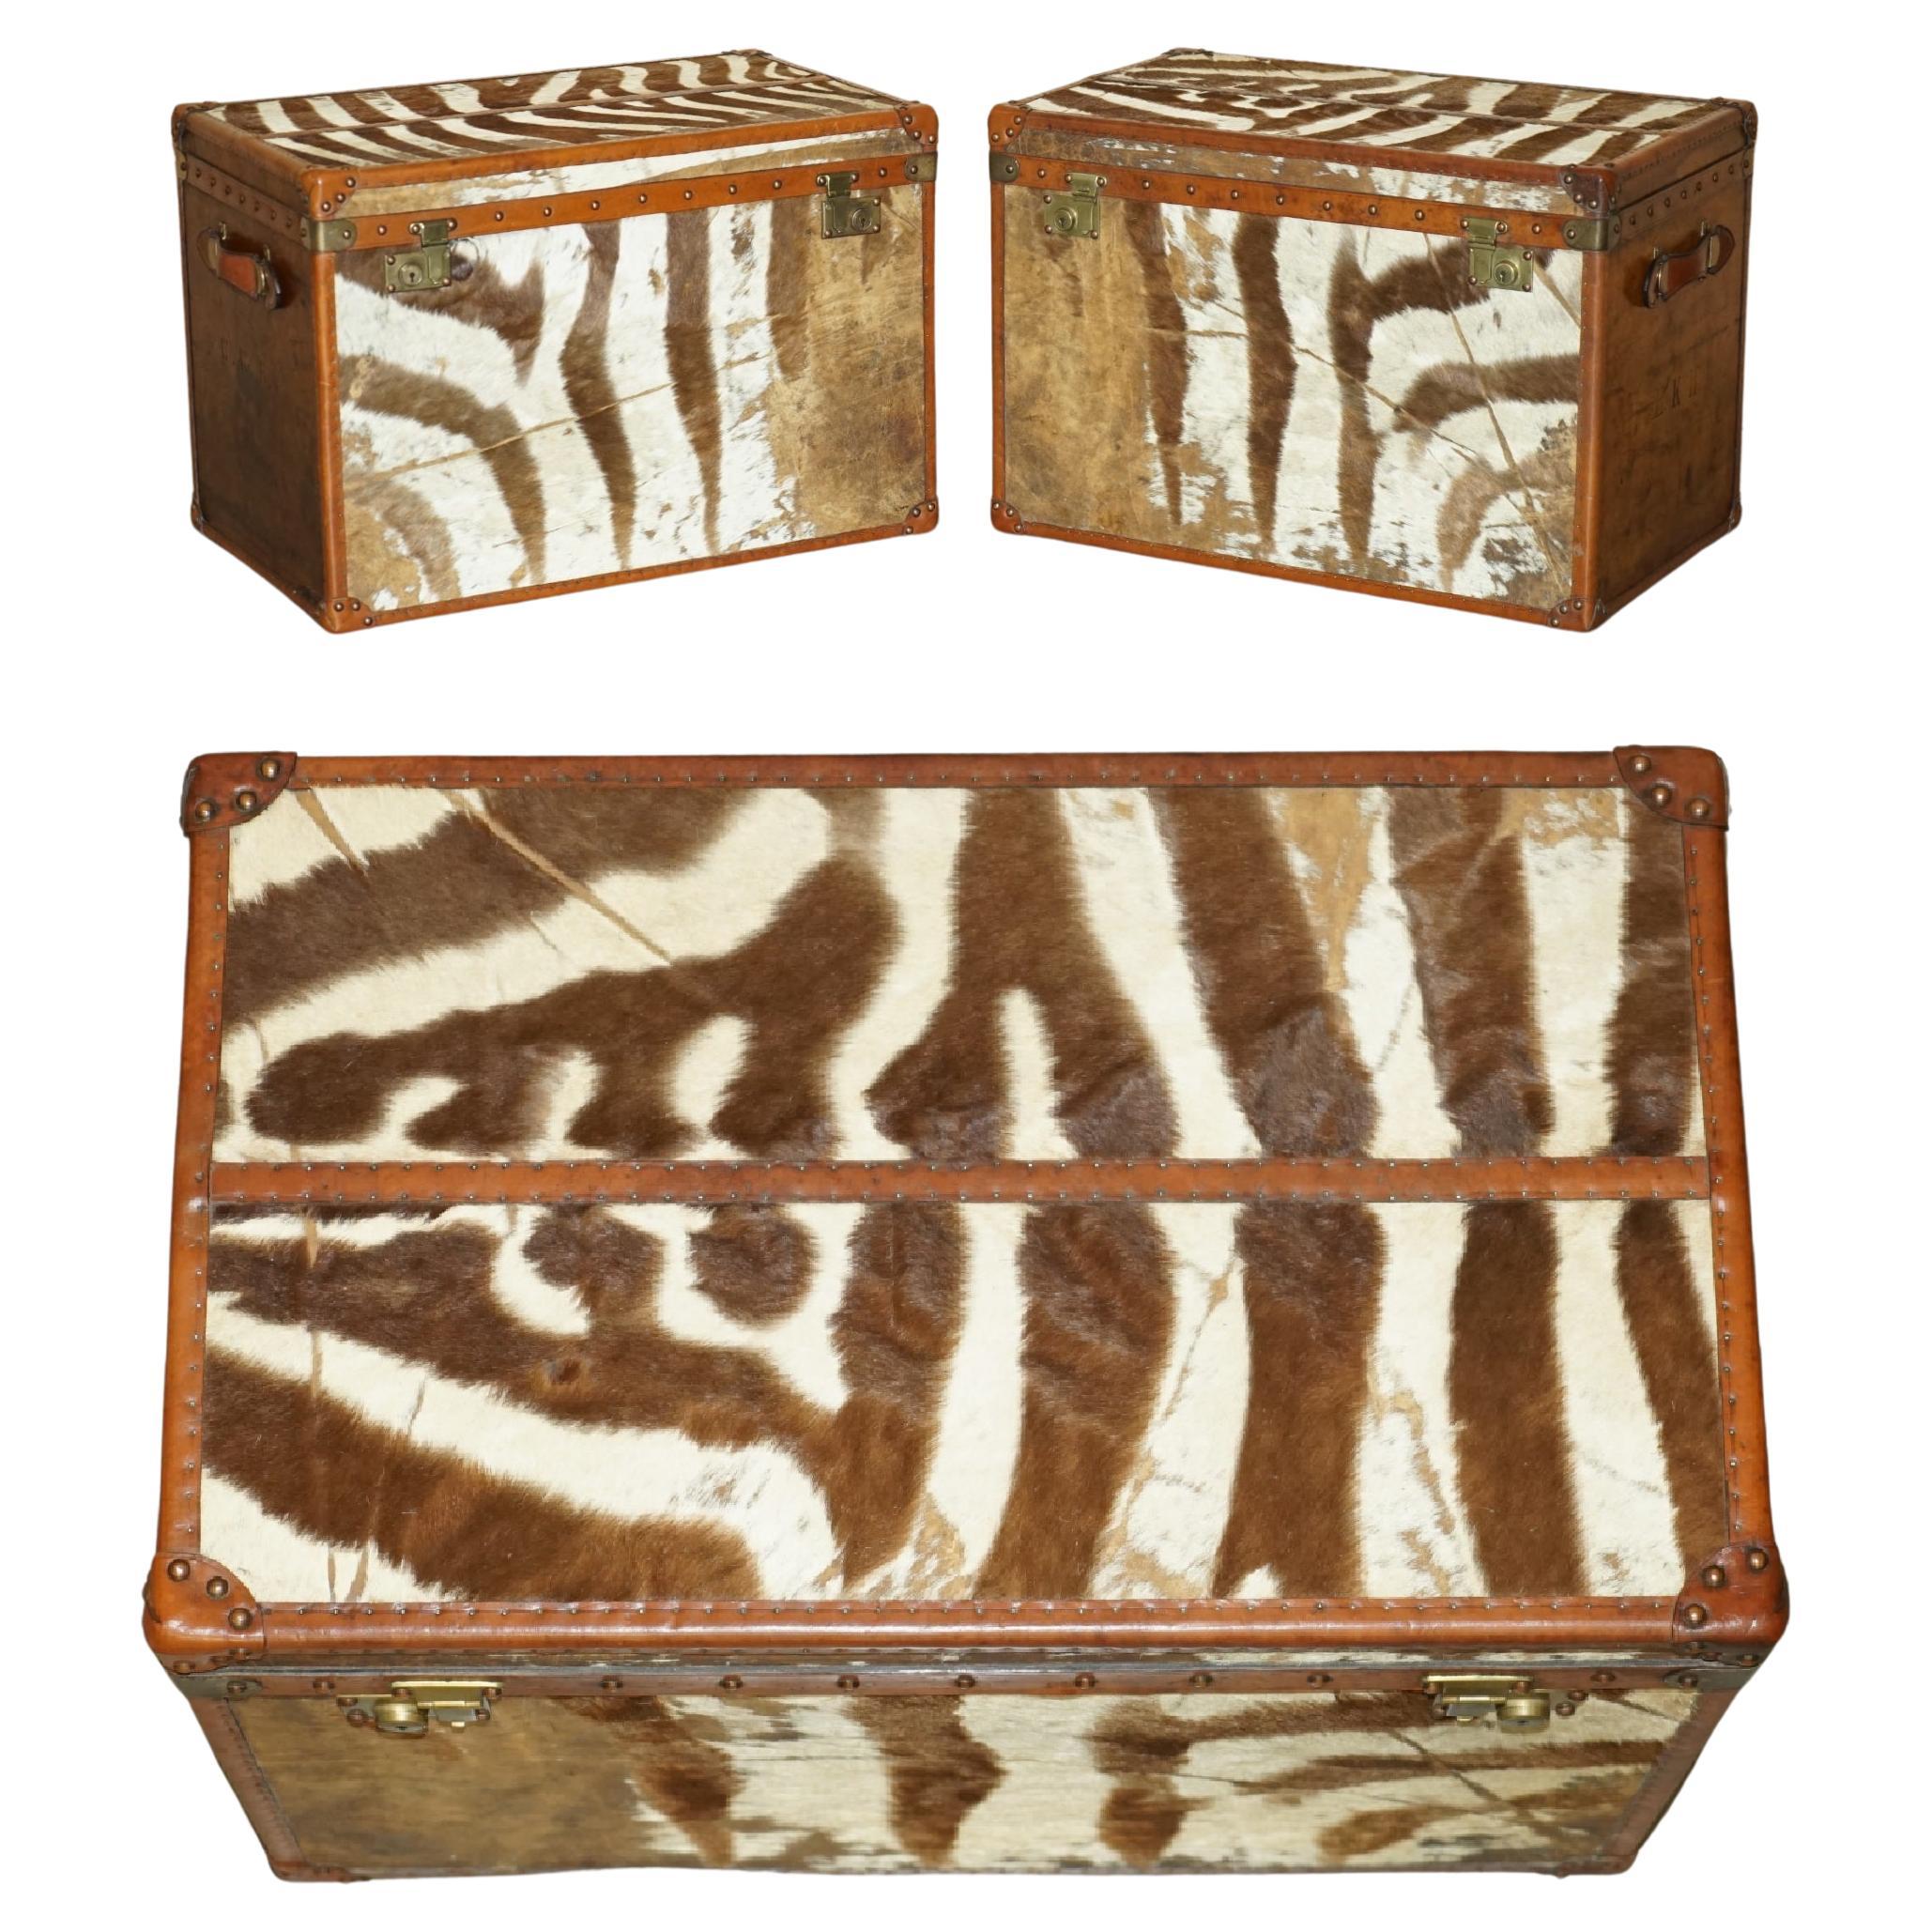 PAiR OF ANTIQUE ZEBRA SKIN & LEATHER UPHOLSTERED STEAMER TRUNKS CHESTS TABLES